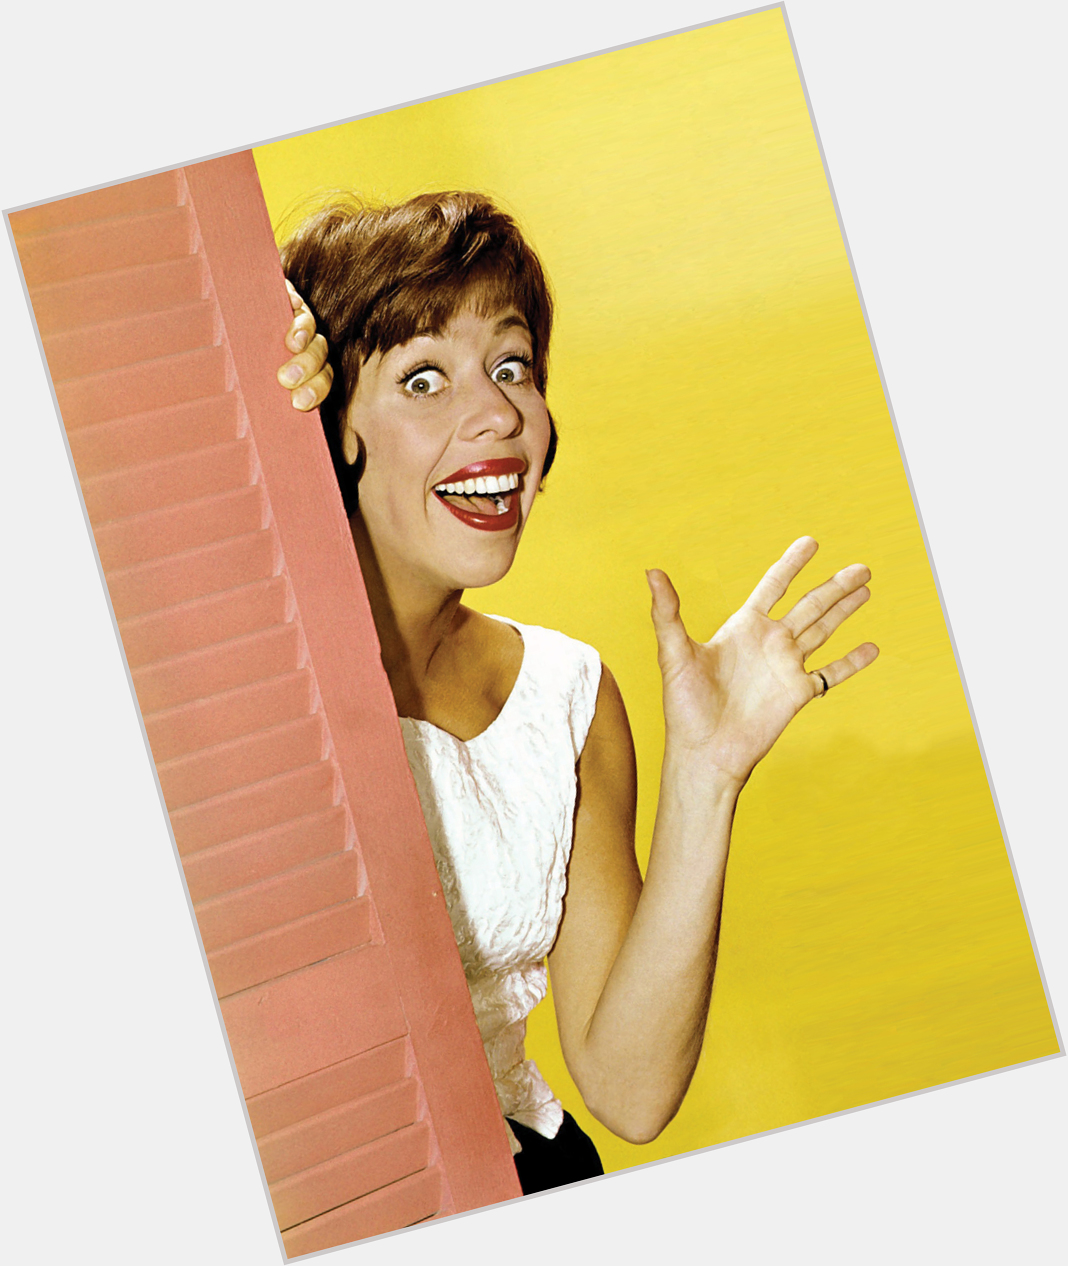 The days almost over and I forgot to say HAPPY BIRTHDAY to the funny lady CAROL BURNETT 